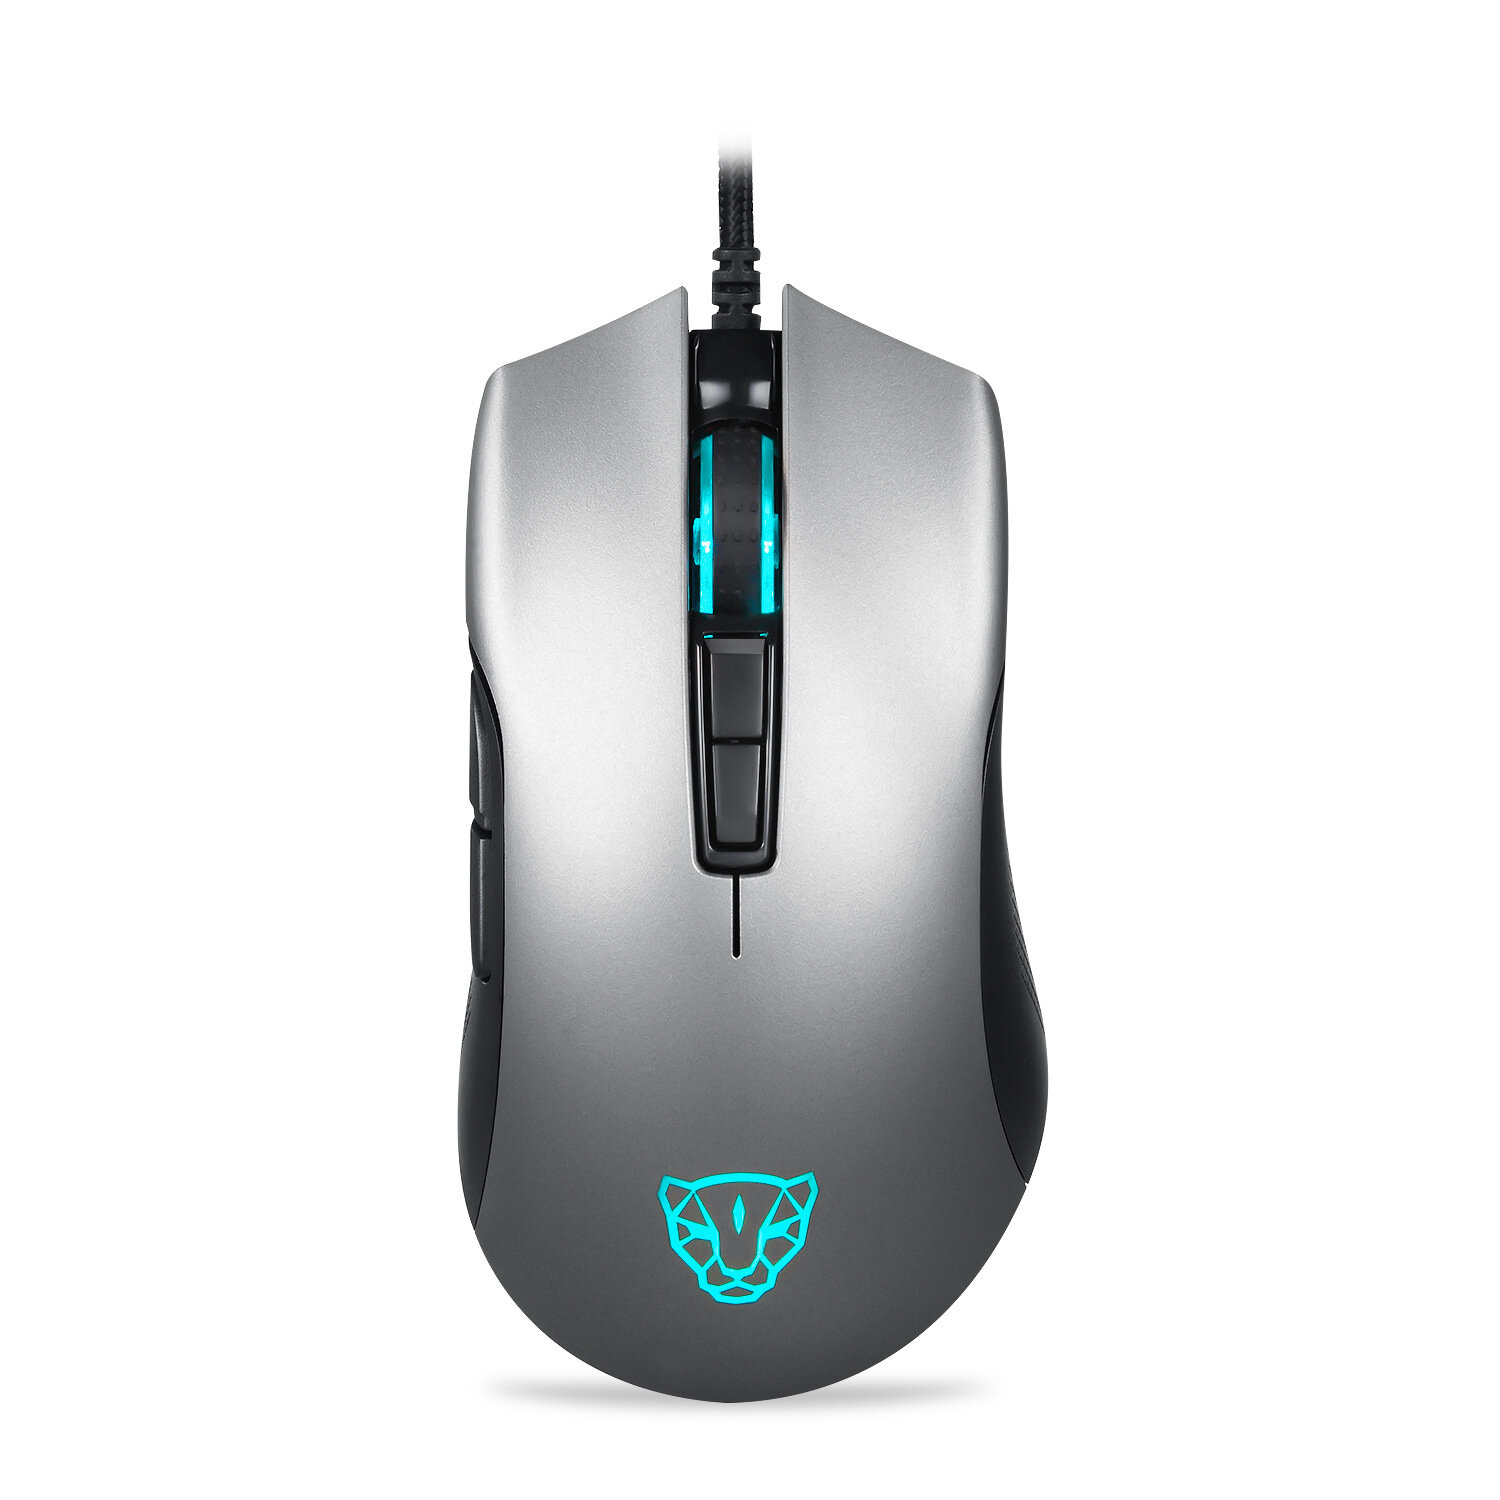 best price,motospeed,v70,gaming,mouse,discount